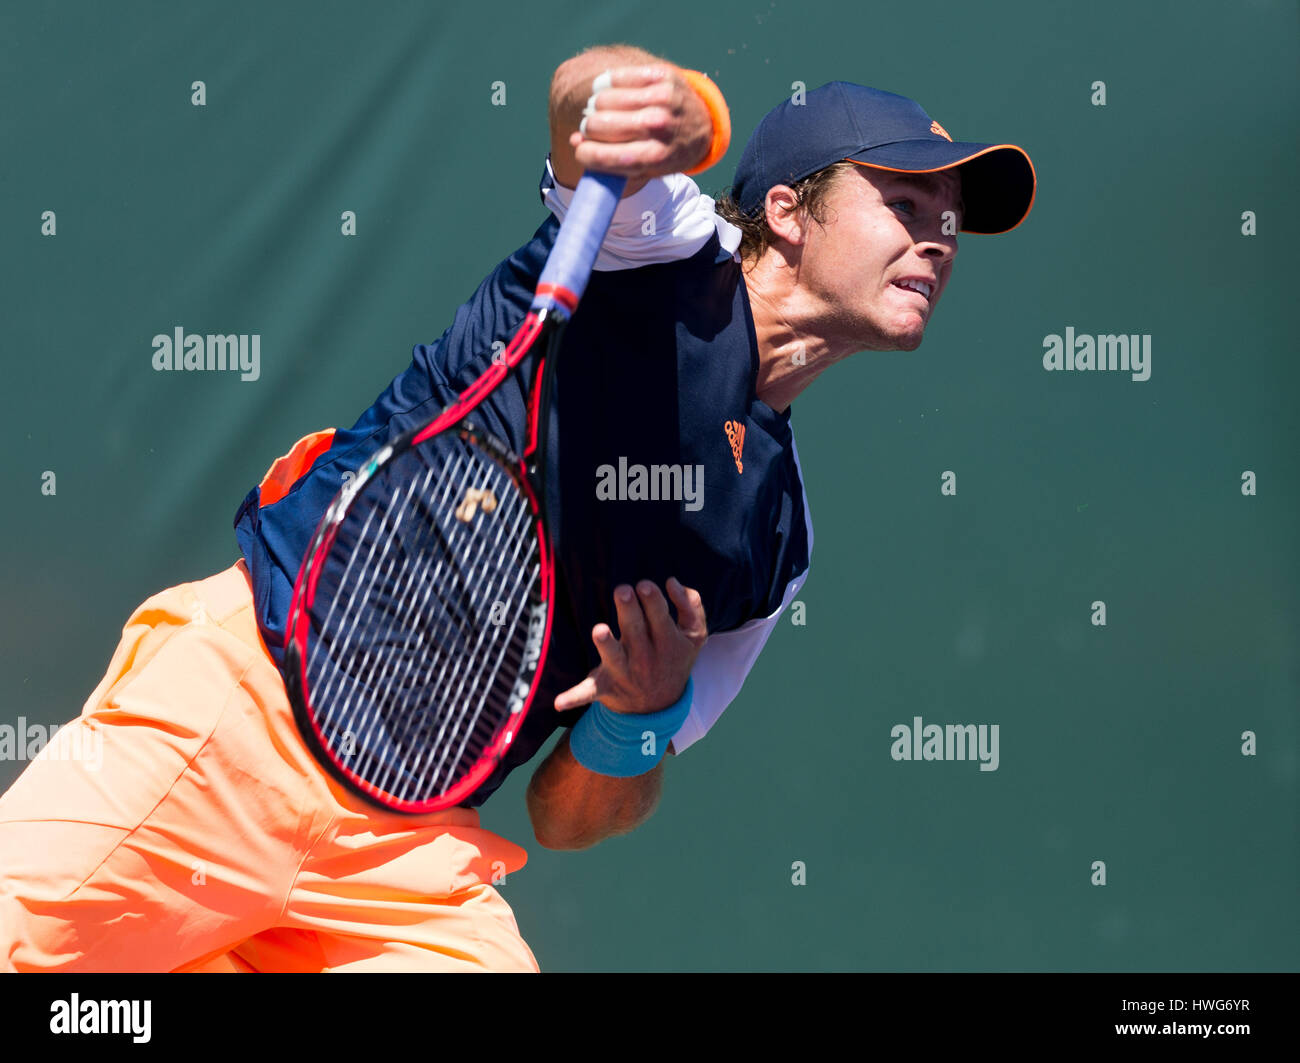 Key Biscayne, Florida, USA. 21st Mar, 2017. Christian Harrison, of the United States, serves against Rogerio Dutra Silva, from Brazil, at the 2017 Miami Open presented by Itau professional tennis tournament, played at Crandon Park Tennis Center in Key Biscayne, Florida, USA. Mario Houben/CSM/Alamy Live News Stock Photo